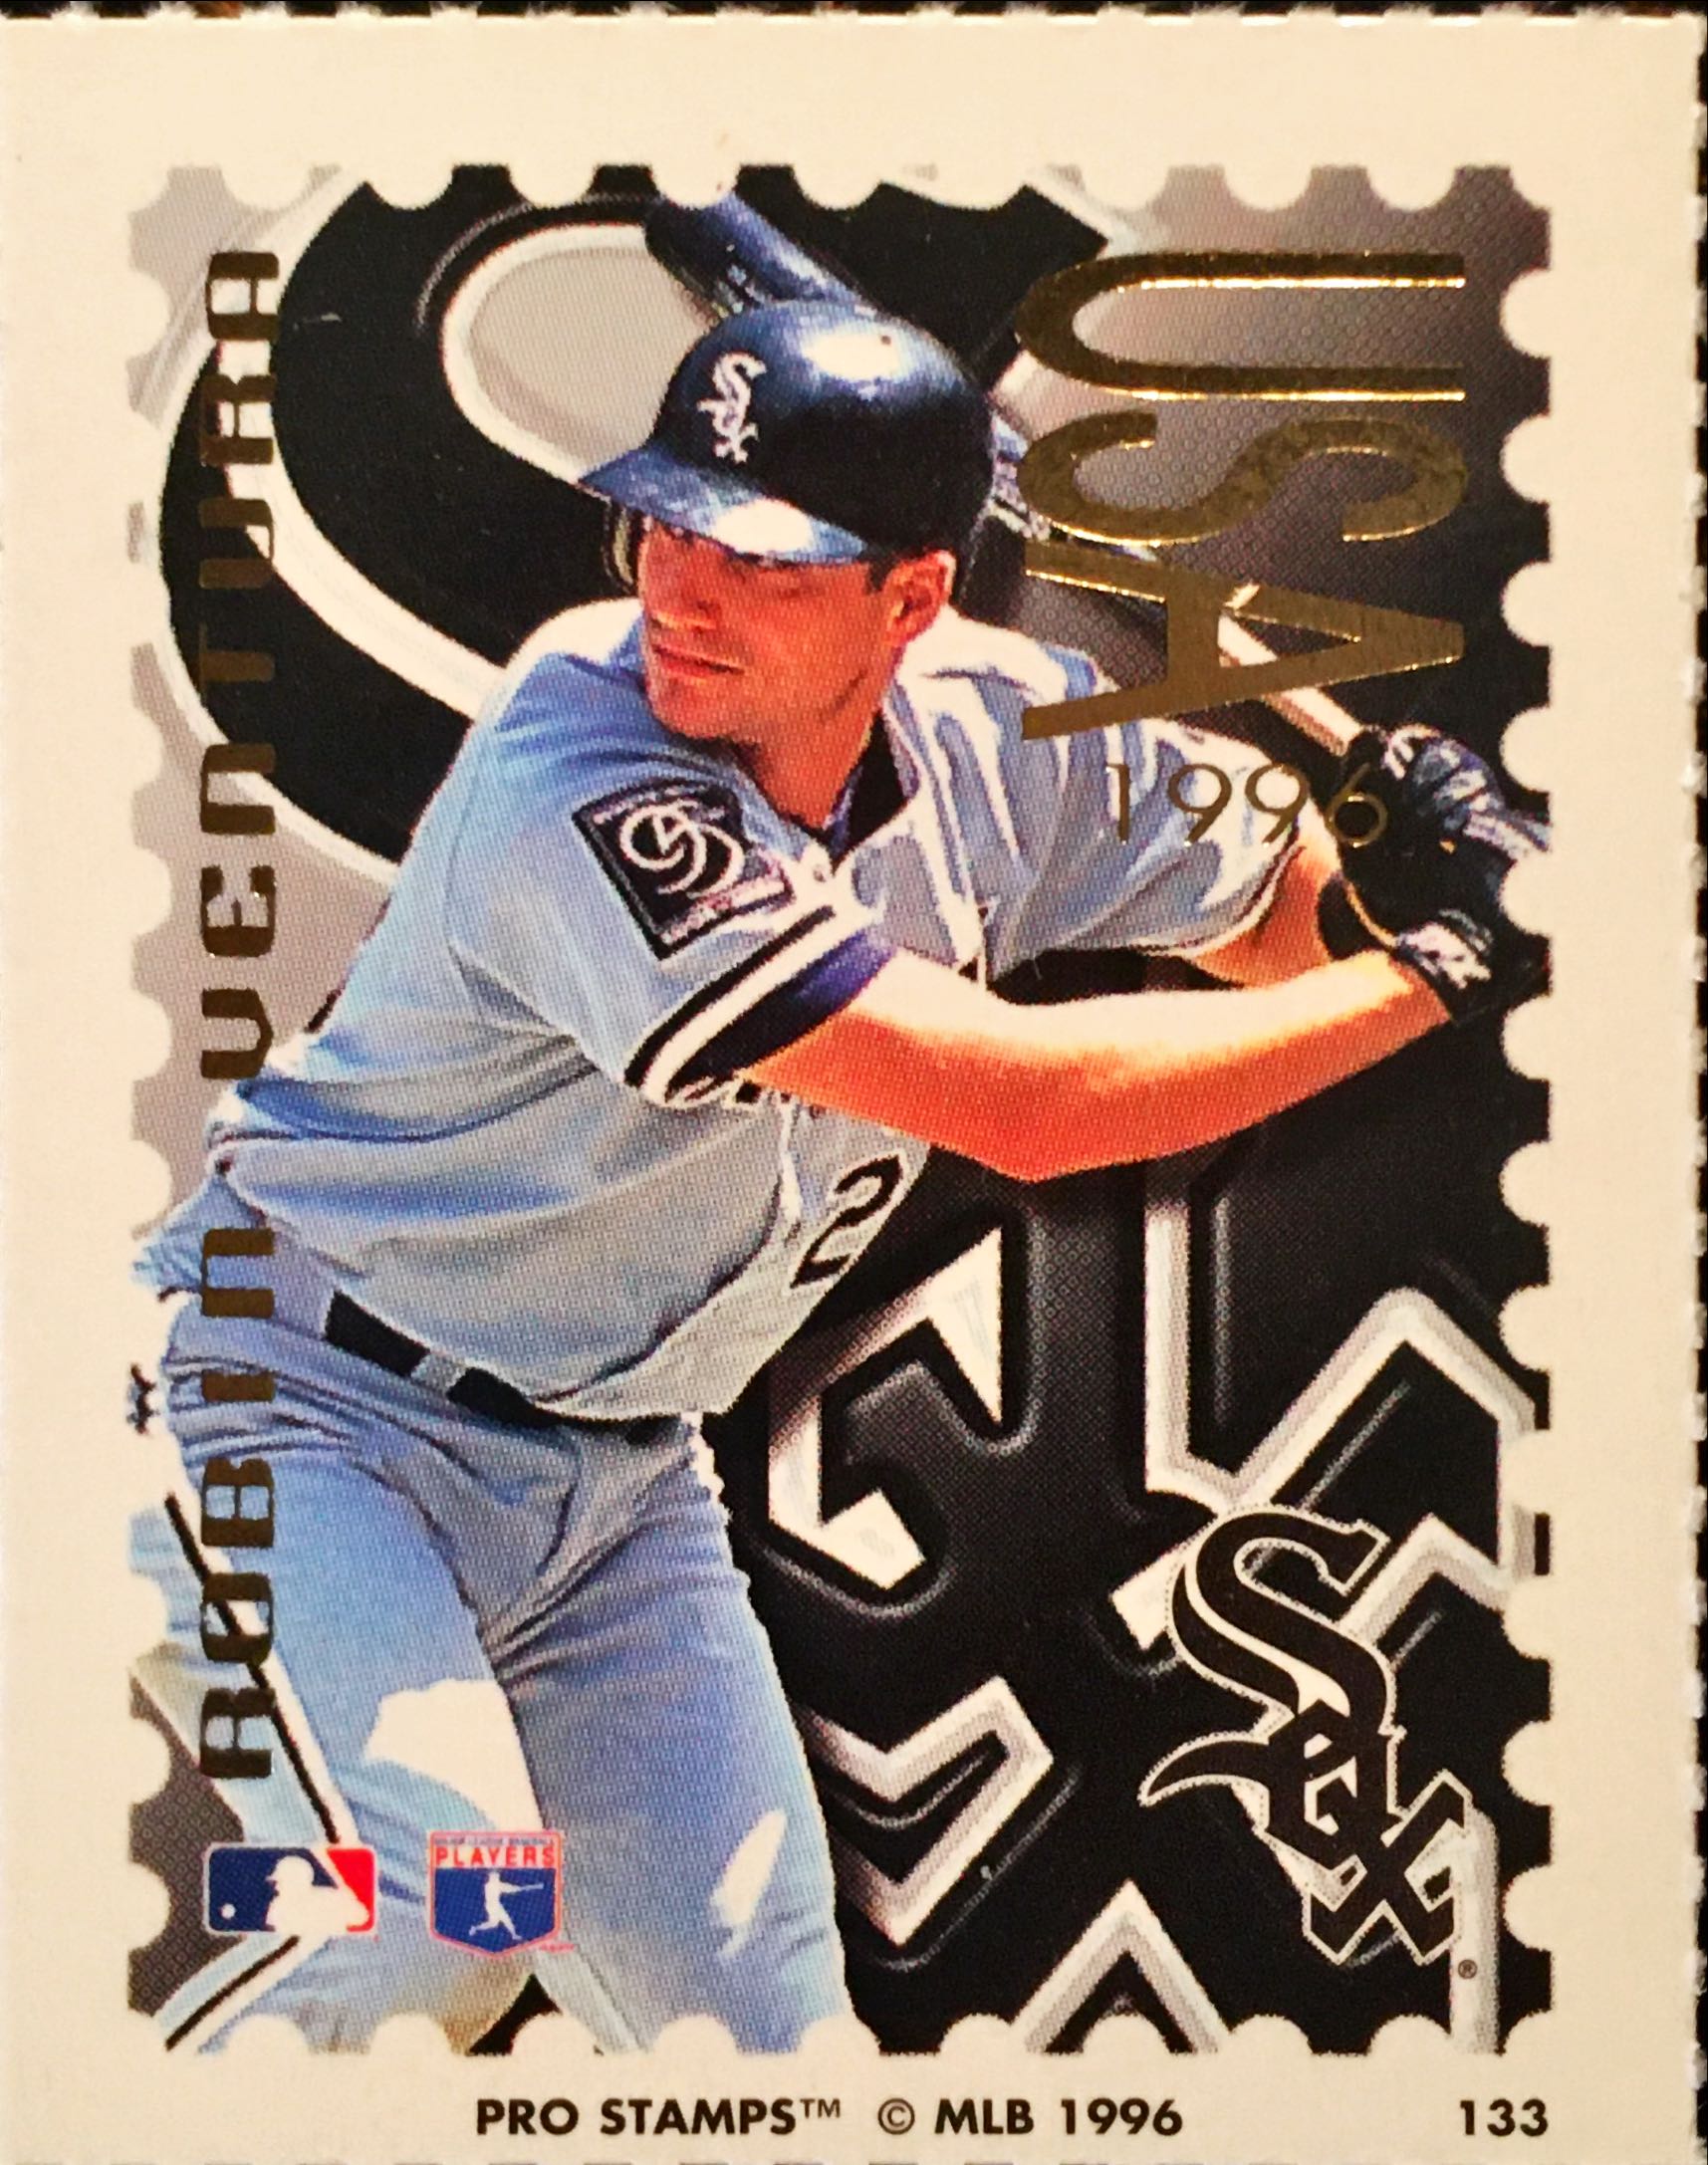 1996 Pro Stamps  133 front image